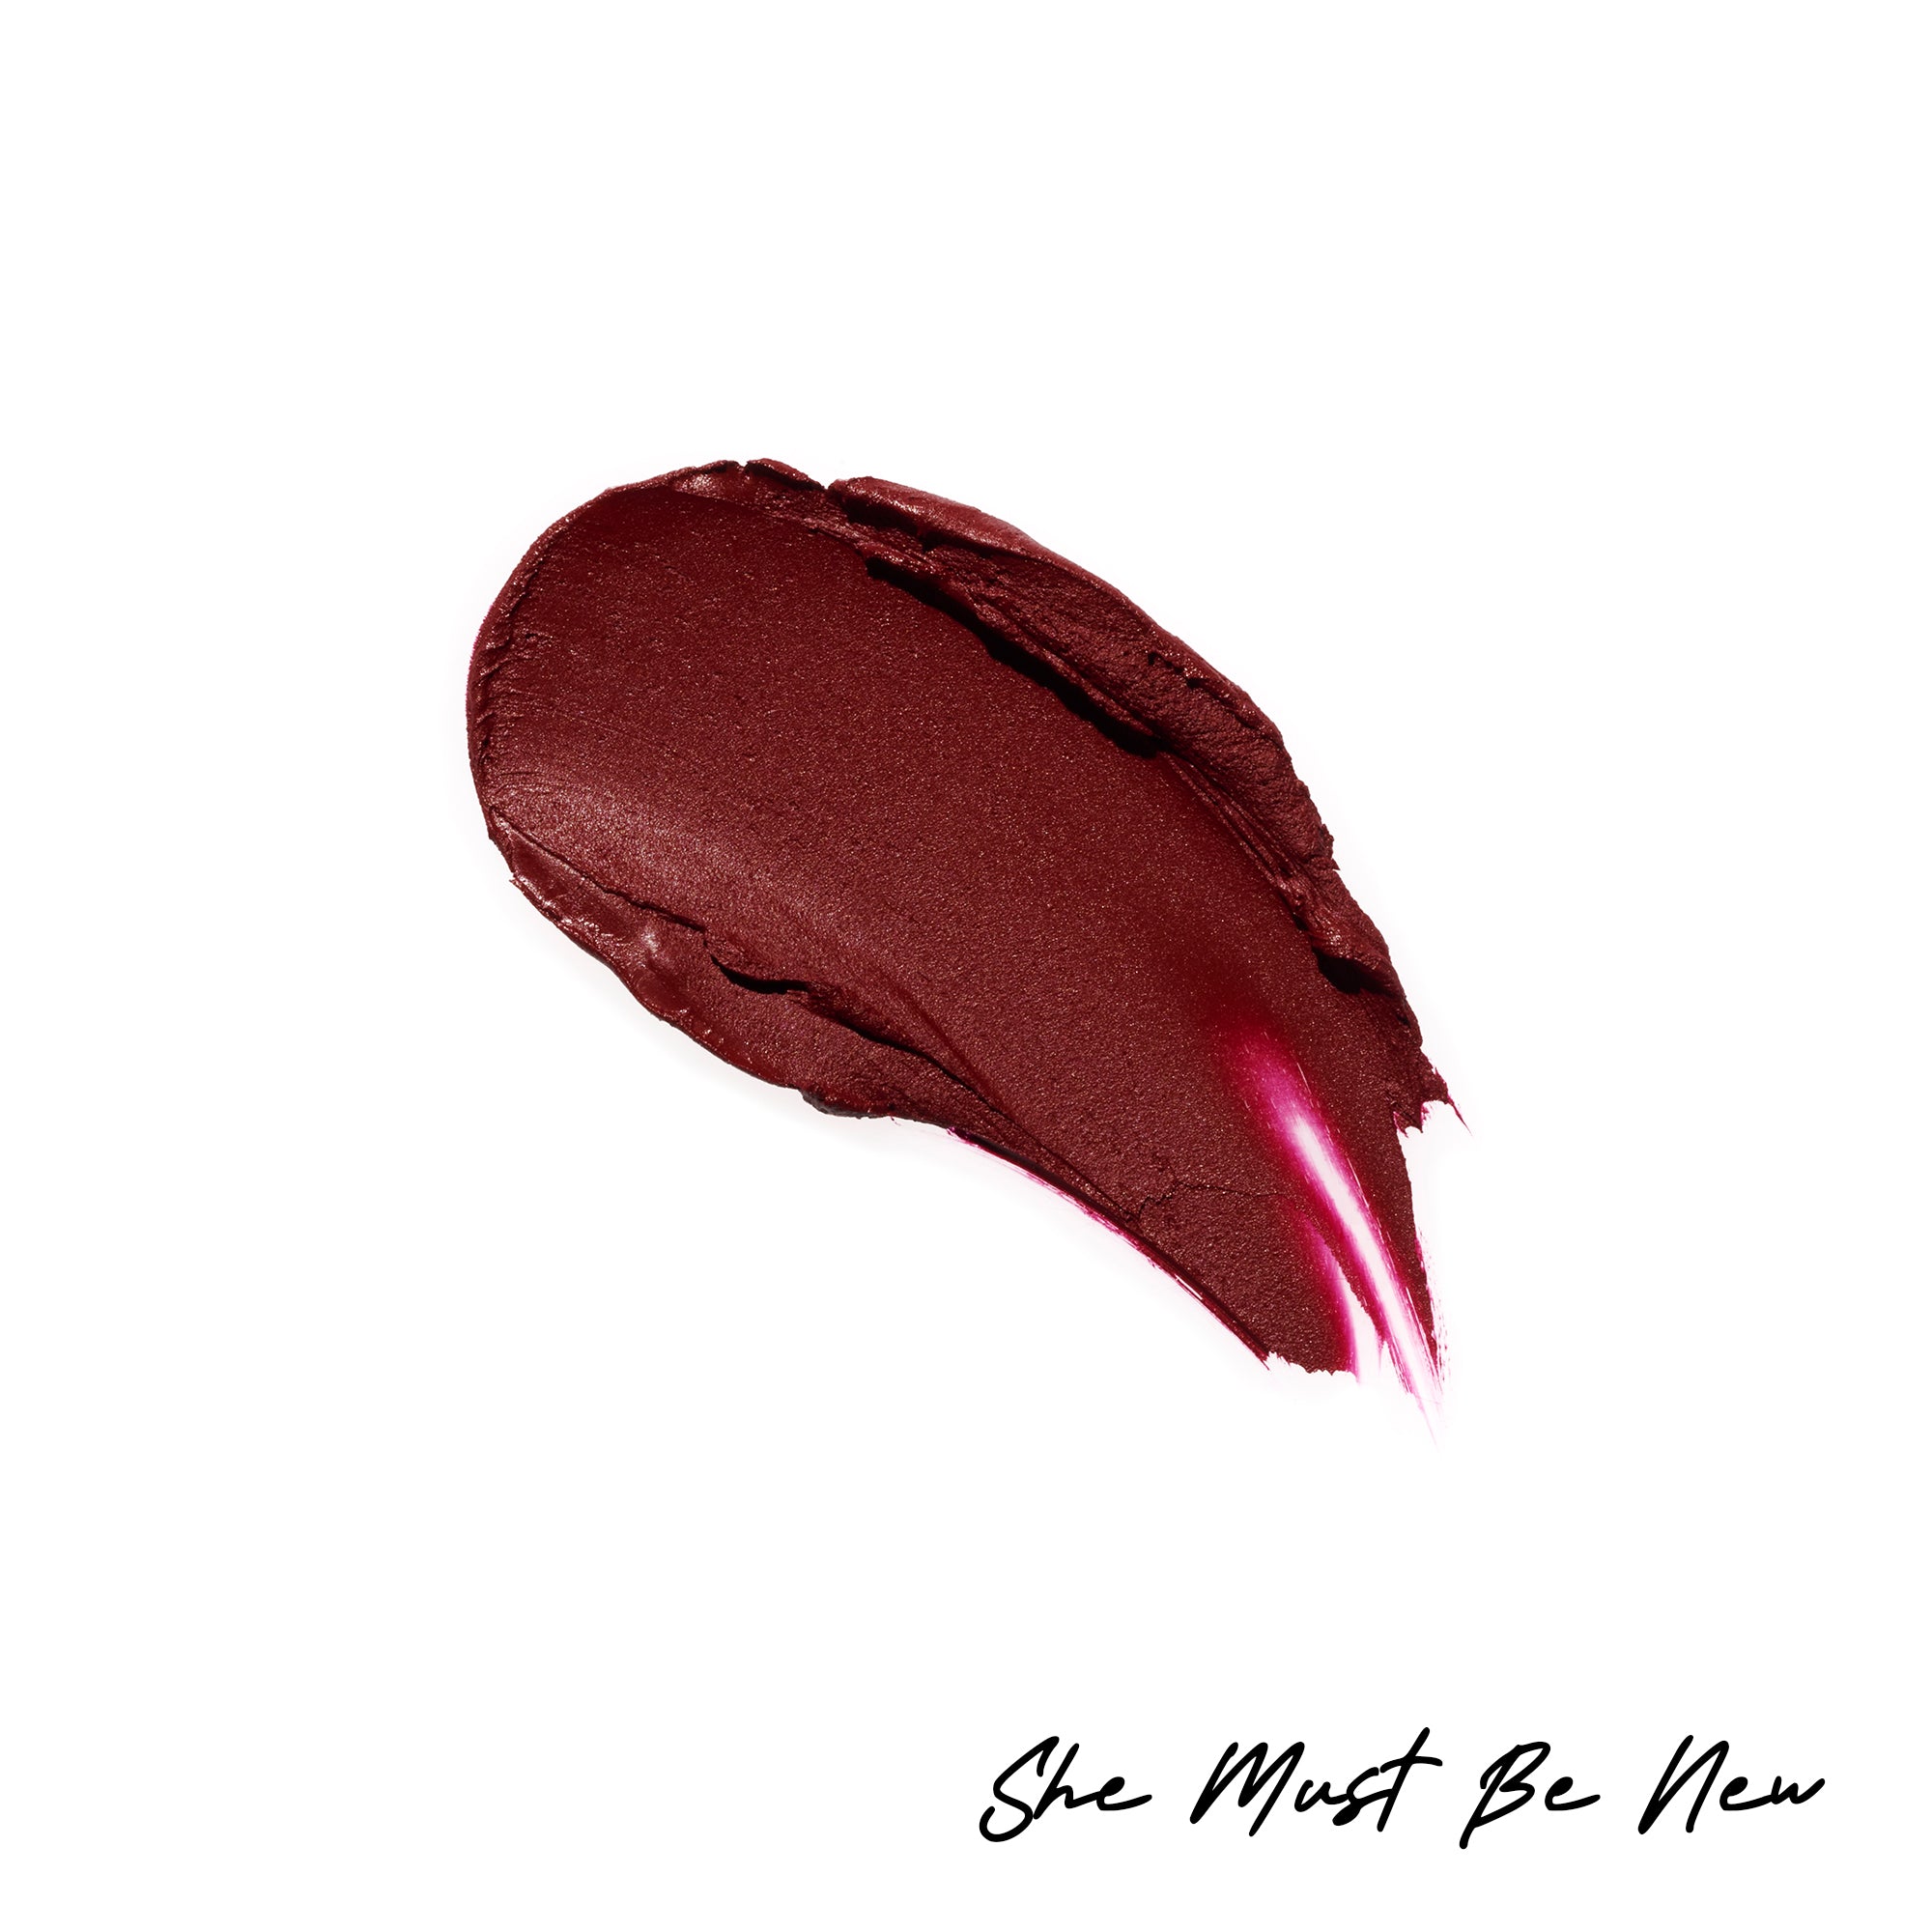 #color_she must be new (deep wine)